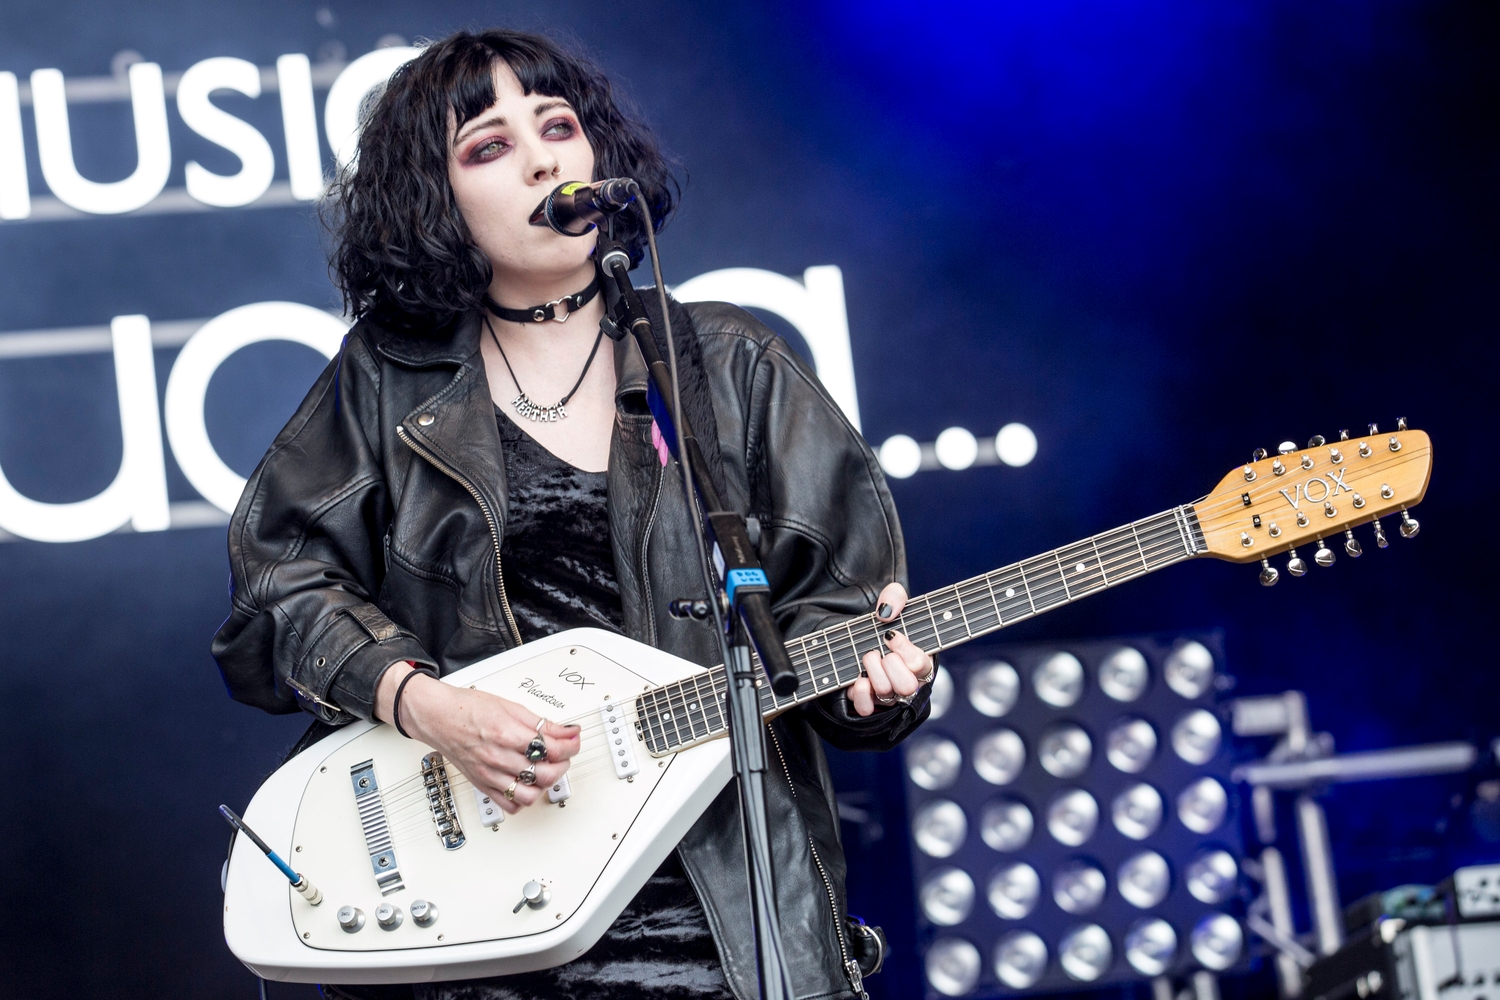 Pale Waves, The Orielles, King Nun and more to play for DIY at The Great Escape